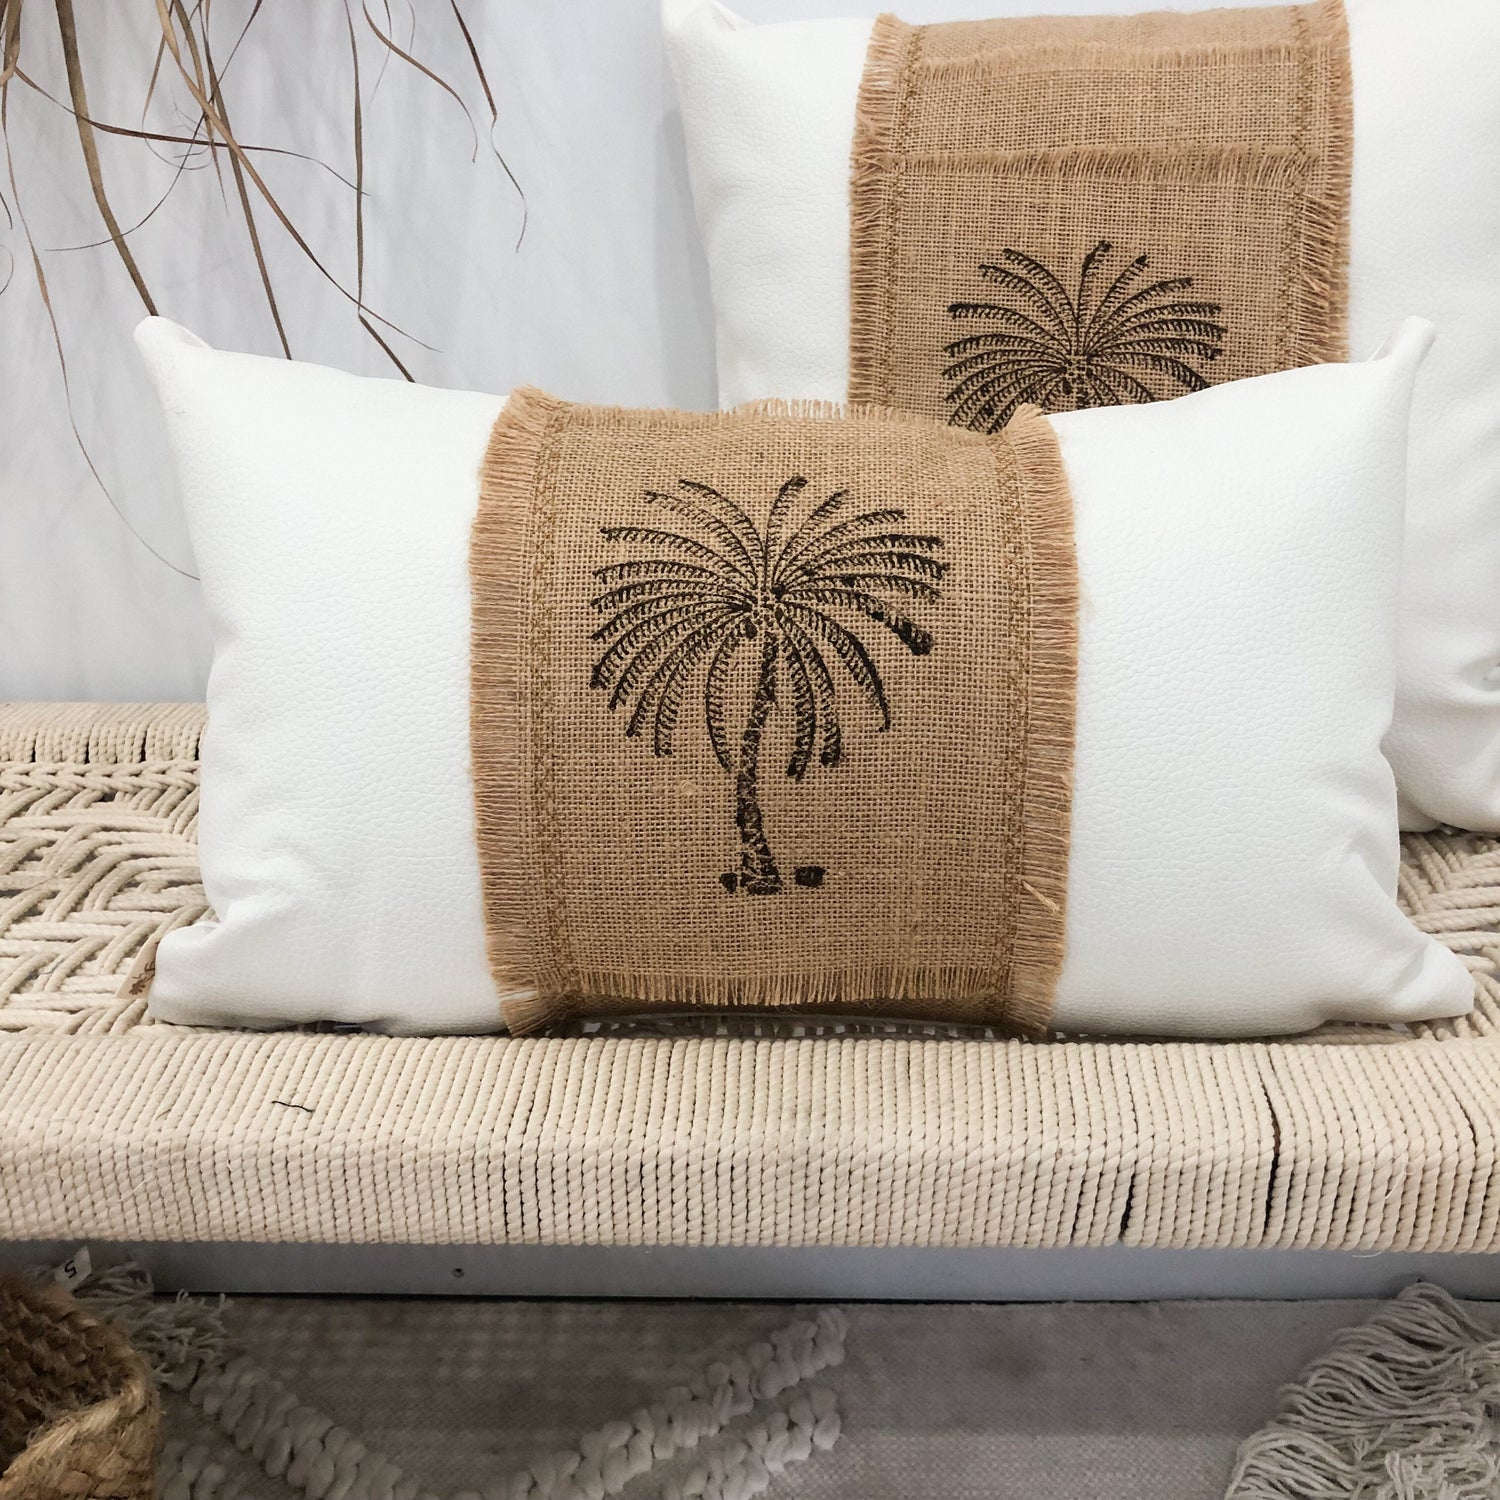 Palm Cushion featuring hand stamped palm on jute